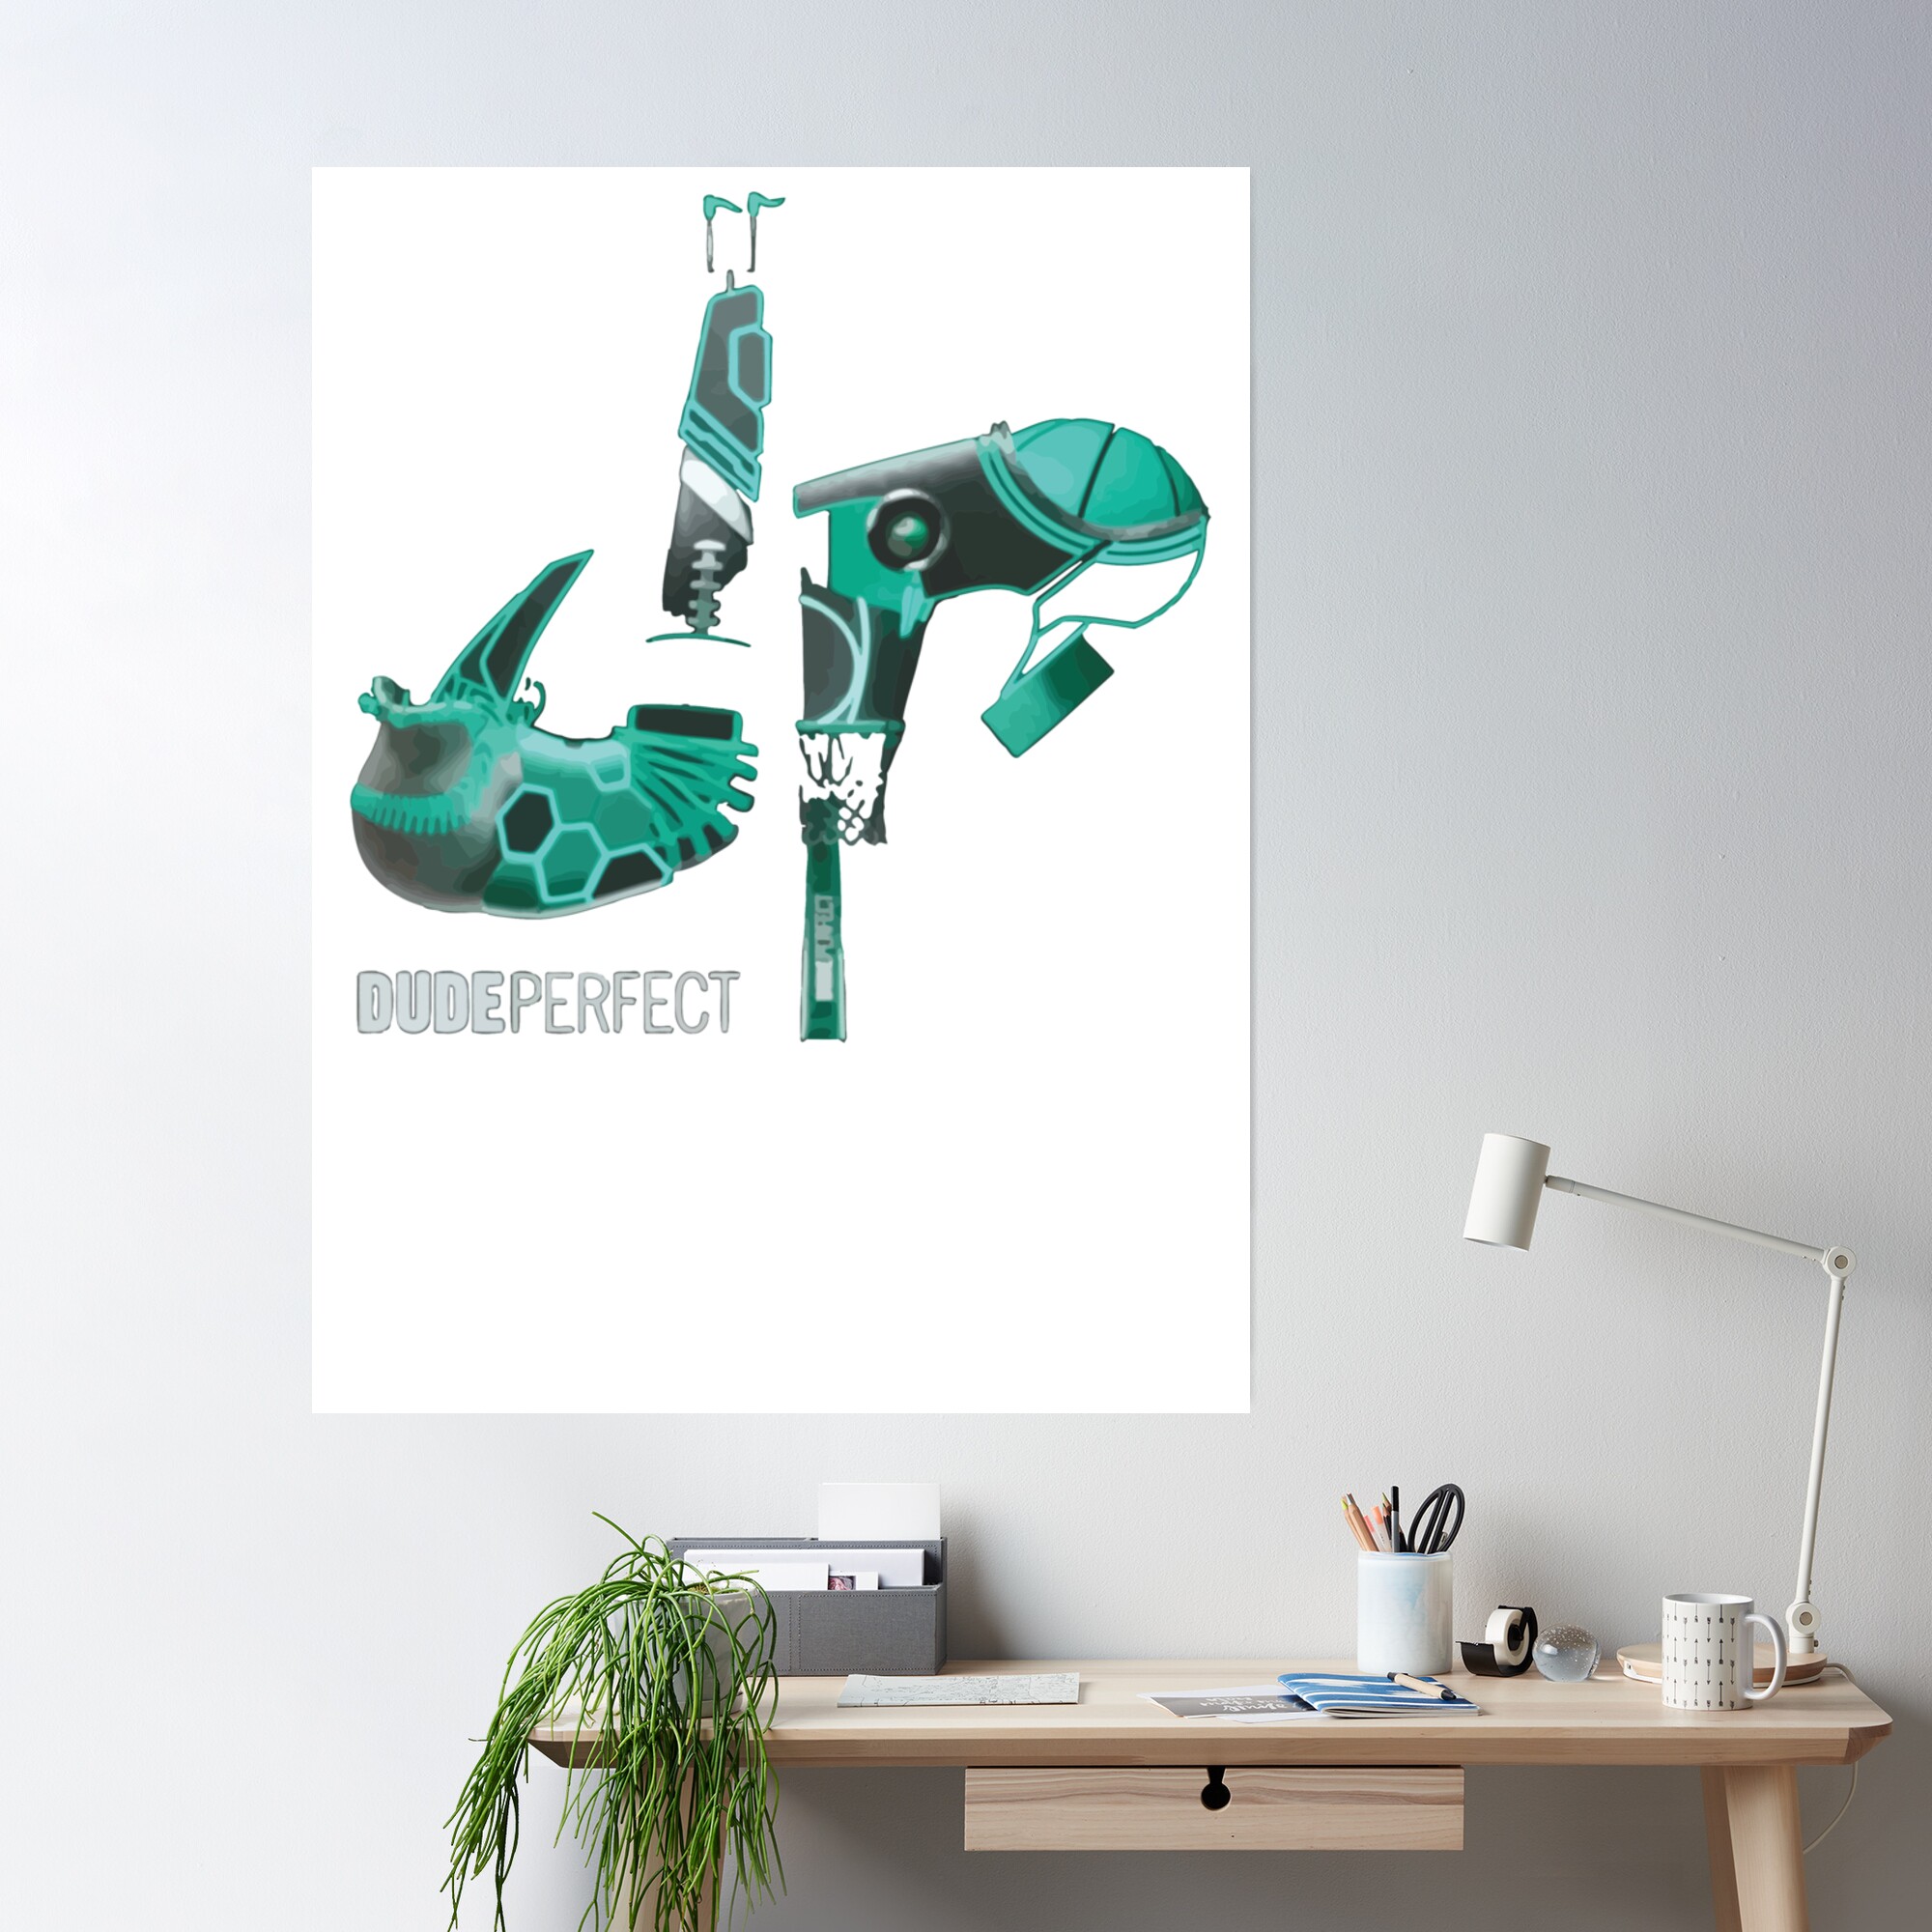 cposterlargesquare product2000x2000 14 - Dude Perfect Merch